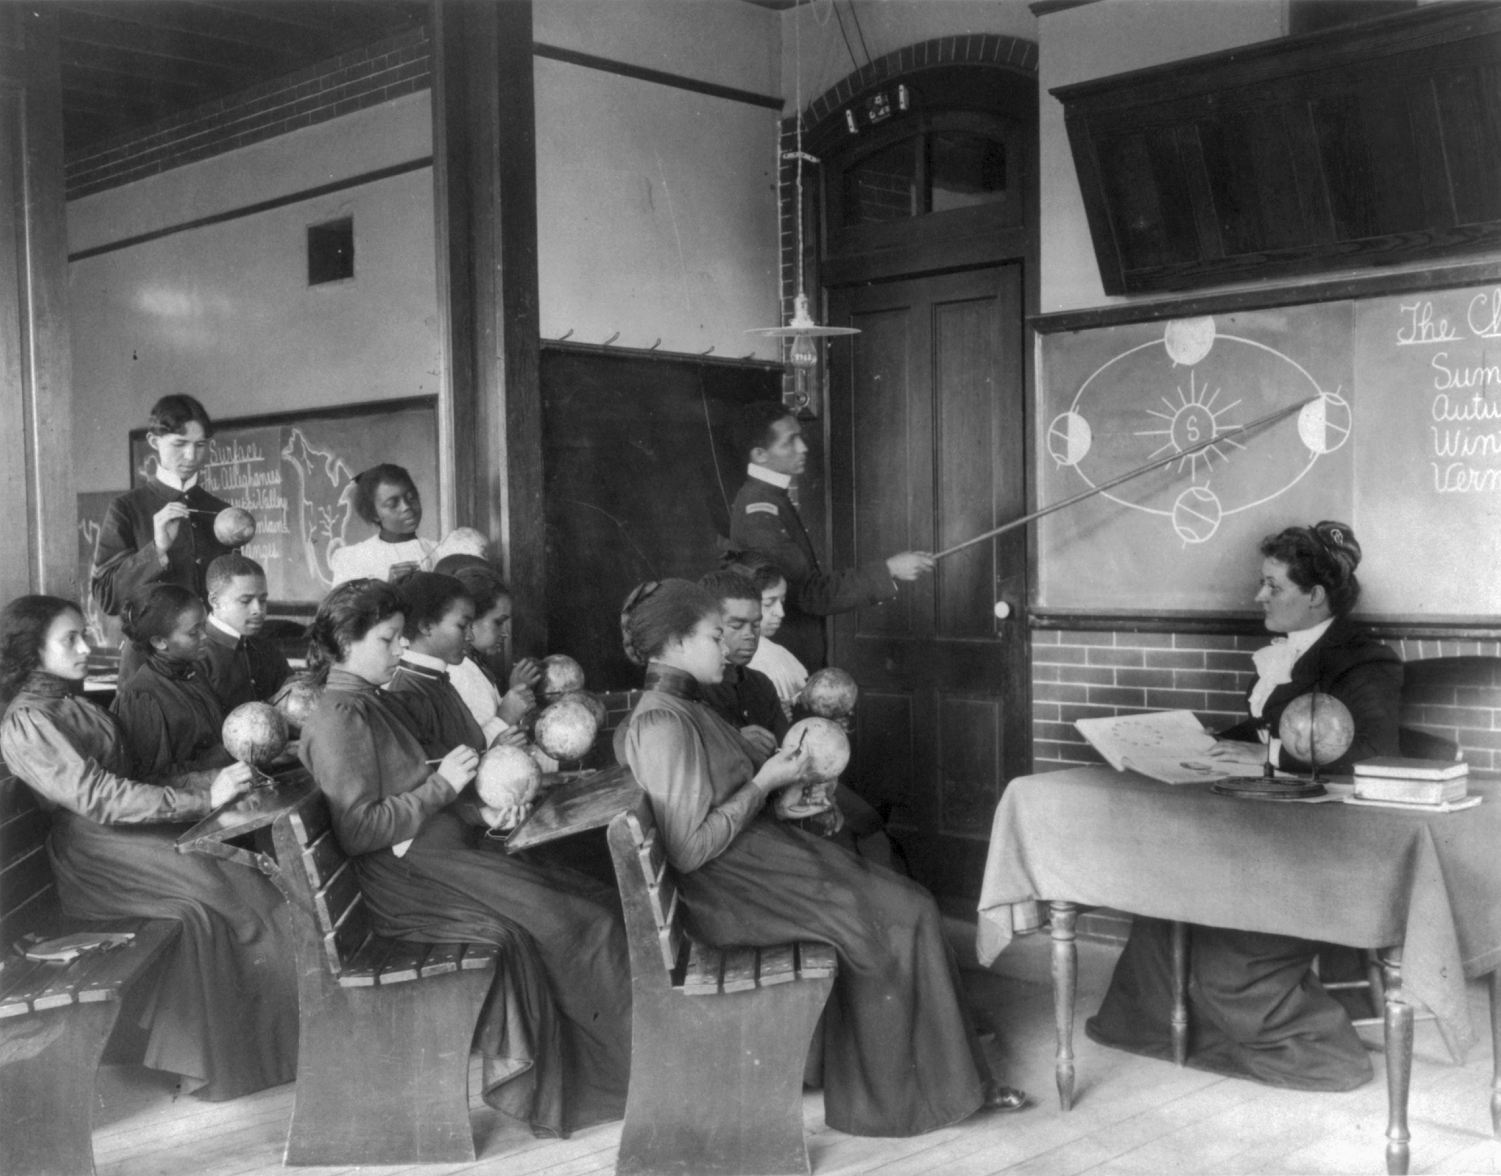 A black and white photograph of a classroom. The students are sitting on benches and hold small globes, looking at them and gesturing with pointers. A woman sits at the front of the room behind a desk. A man stands in the background and uses a long stick to point to a diagram on the board behind the woman.